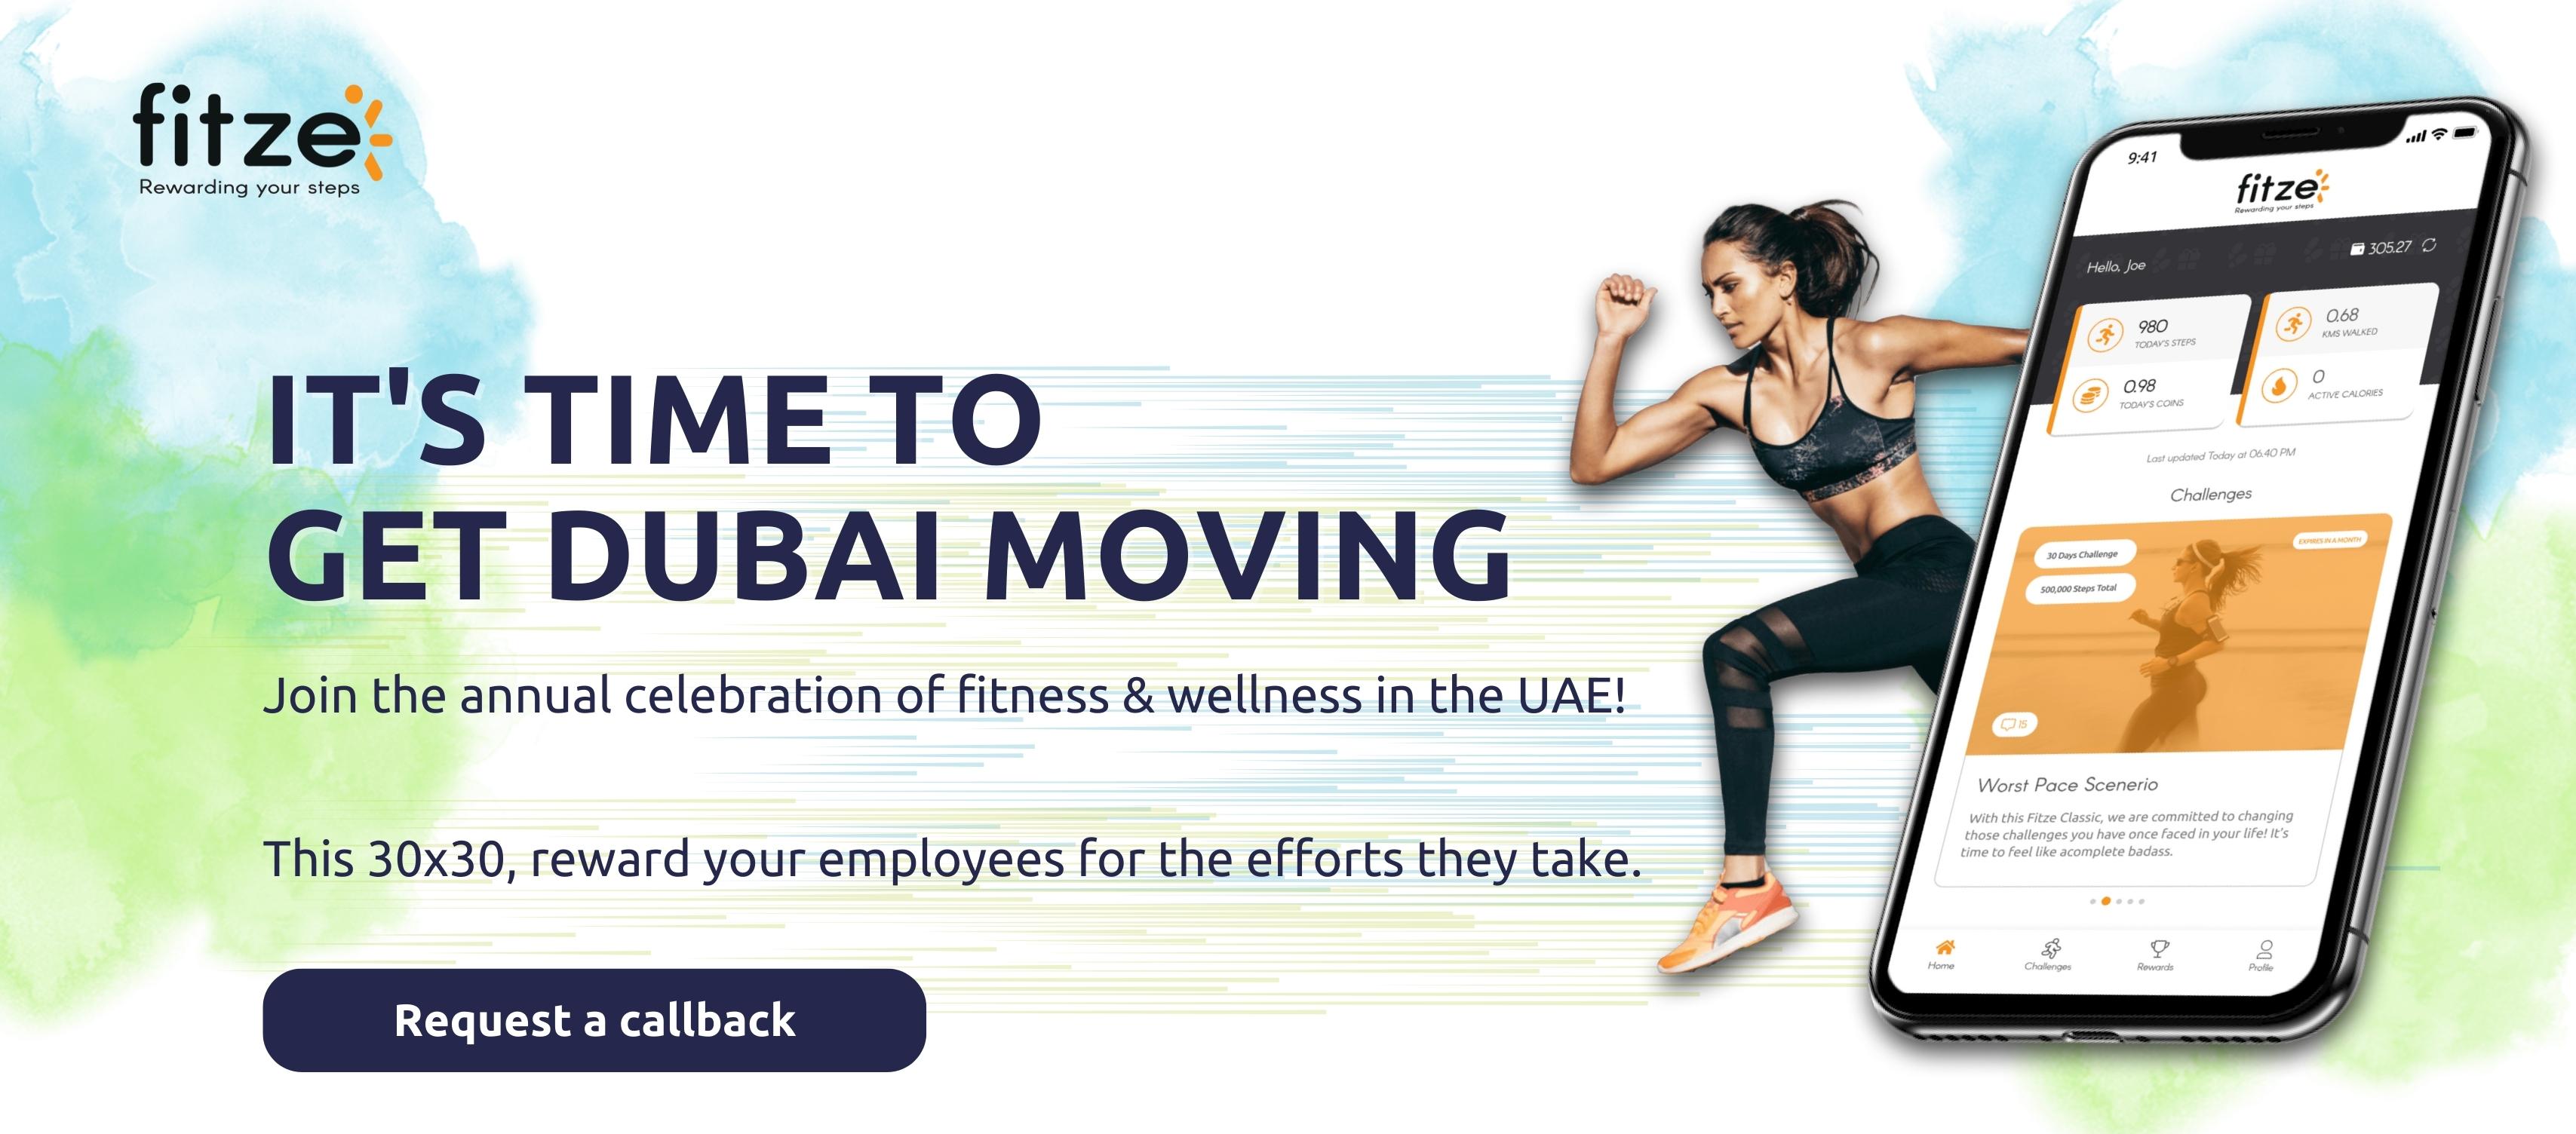 It's time to get Dubai moving.